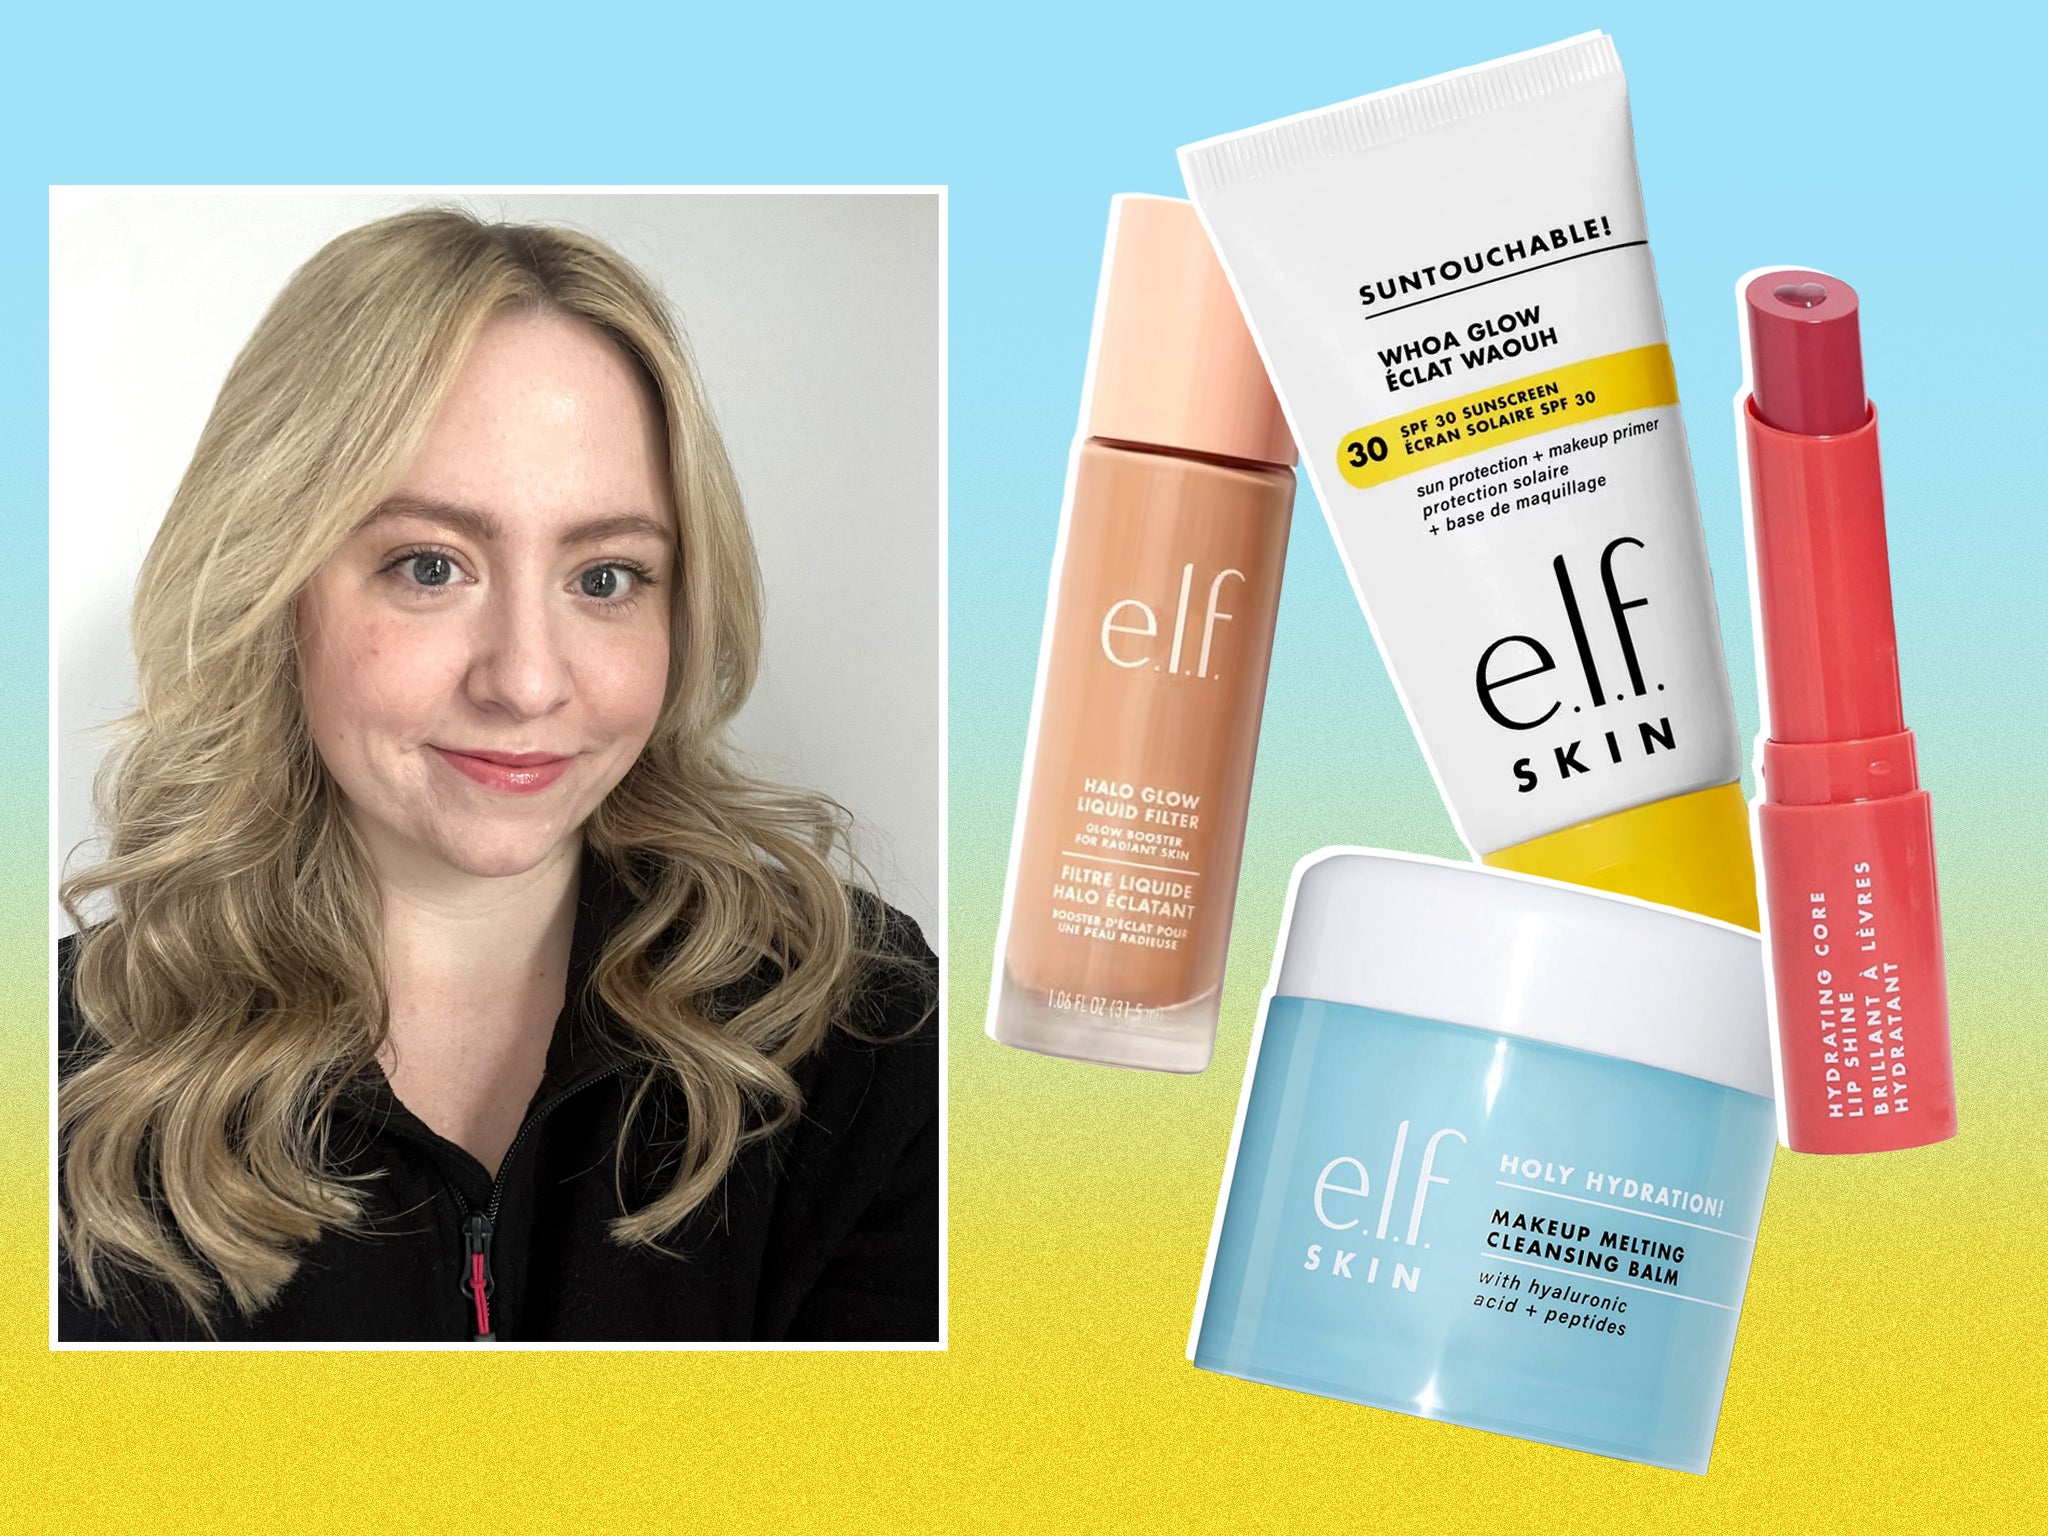 The best e.l.f. products, according to a beauty editor